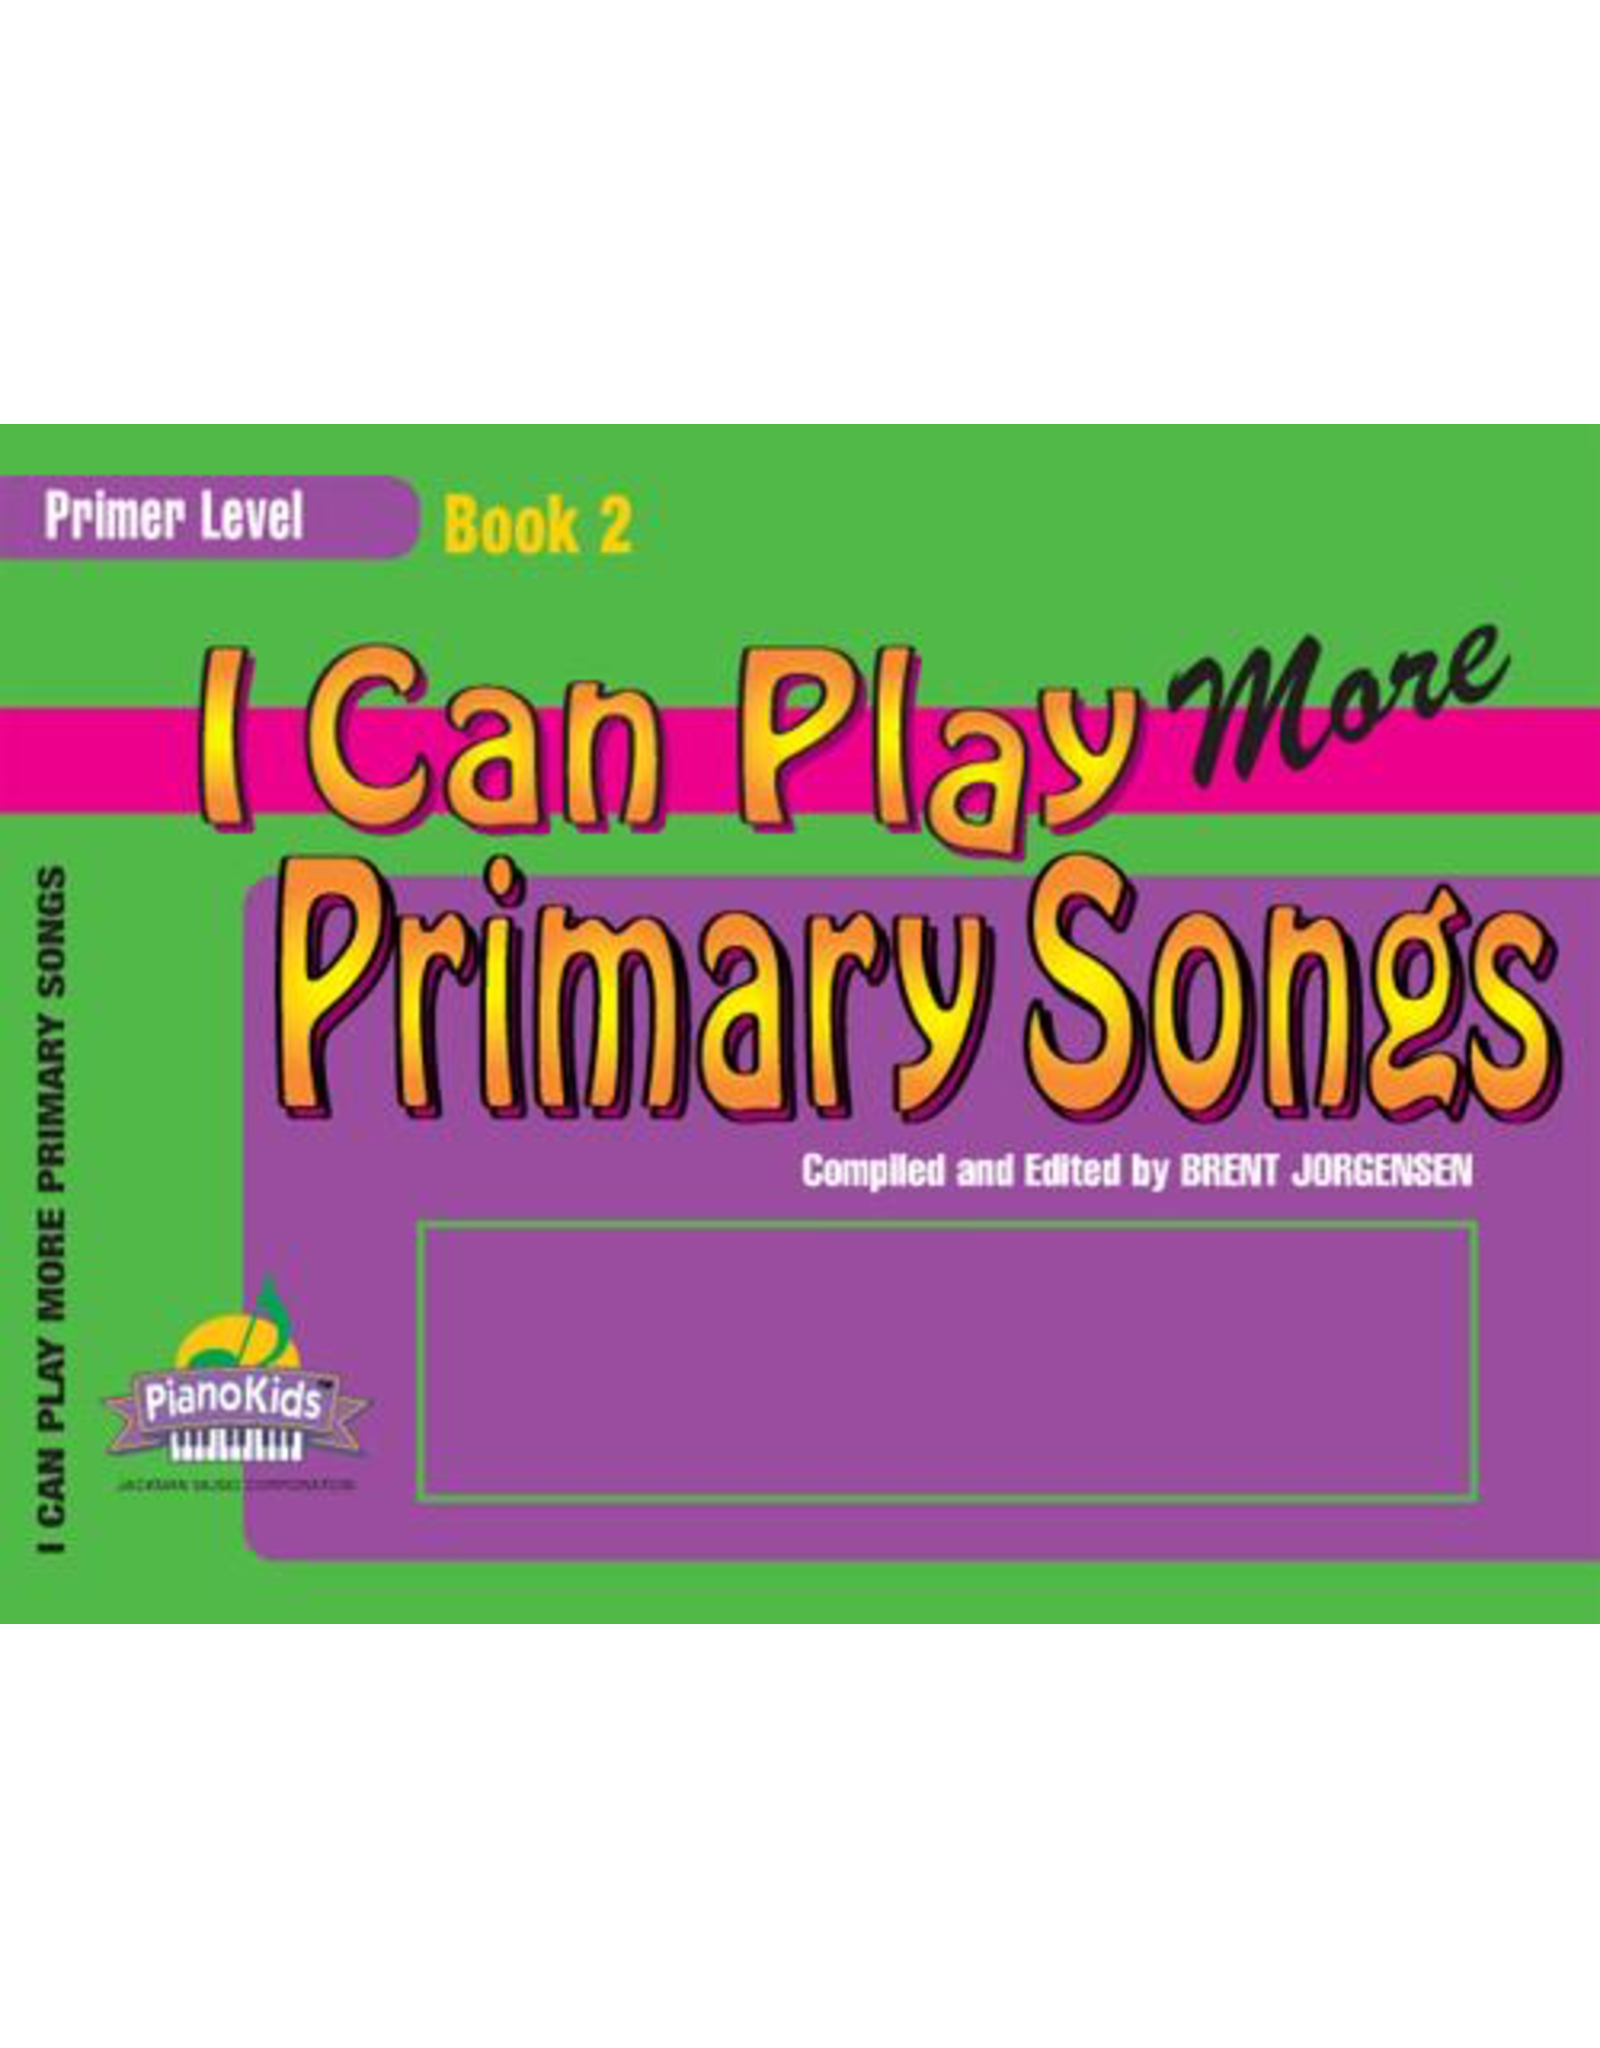 Jackman Music I Can Play More Primary Songs, Book 2 Primer Level arr. Brent Jorgensen